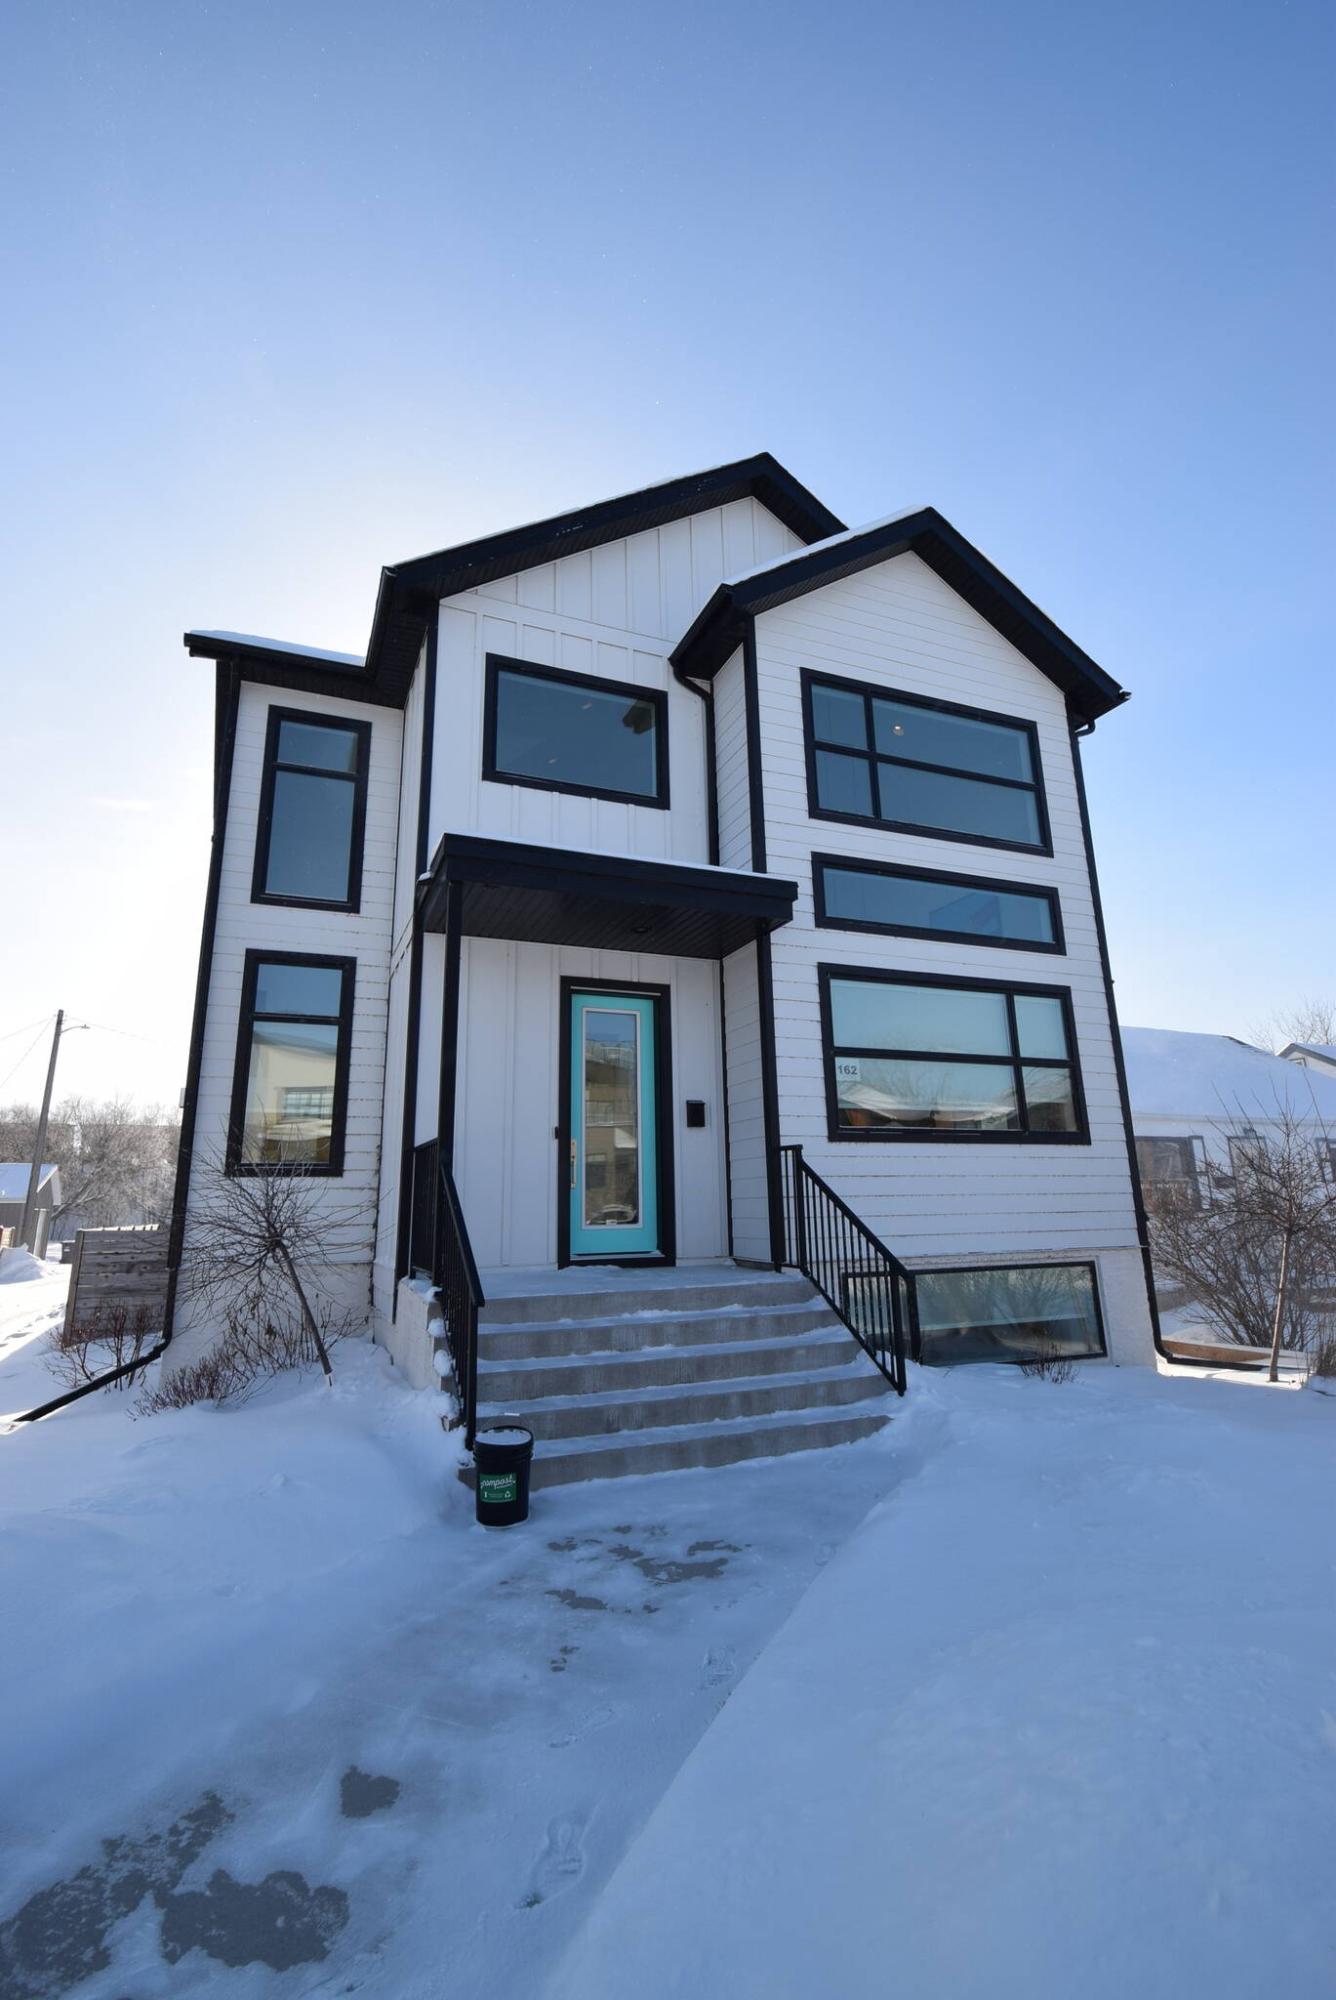  <p>Situated on a 40-foot by 122-foot infill lot, the six-year-old two-storey home features a spectacular yet practical design from top to bottom.</p> 